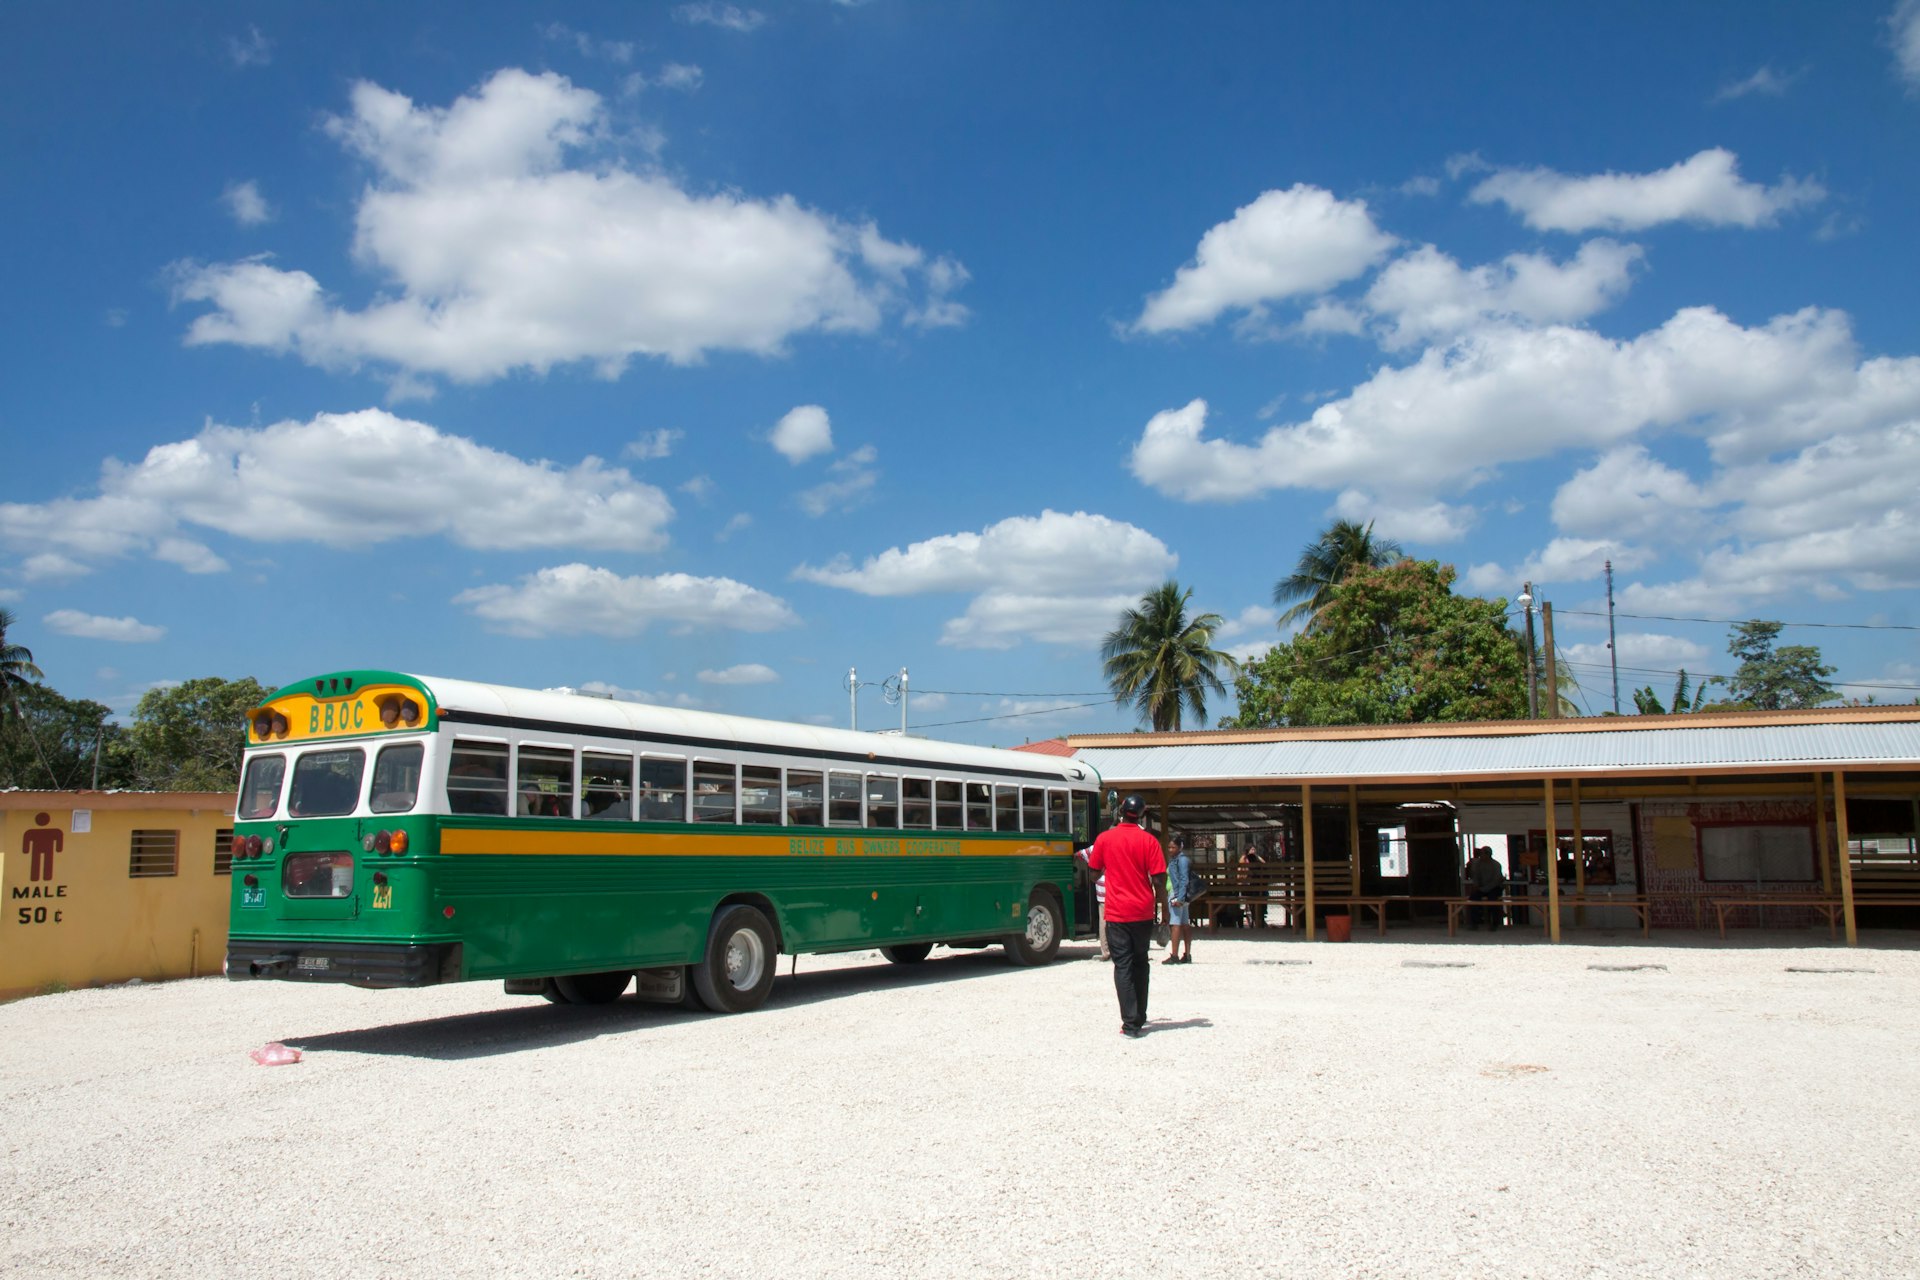 A 1950s-style green school bus is parked at a bus station in Belize City